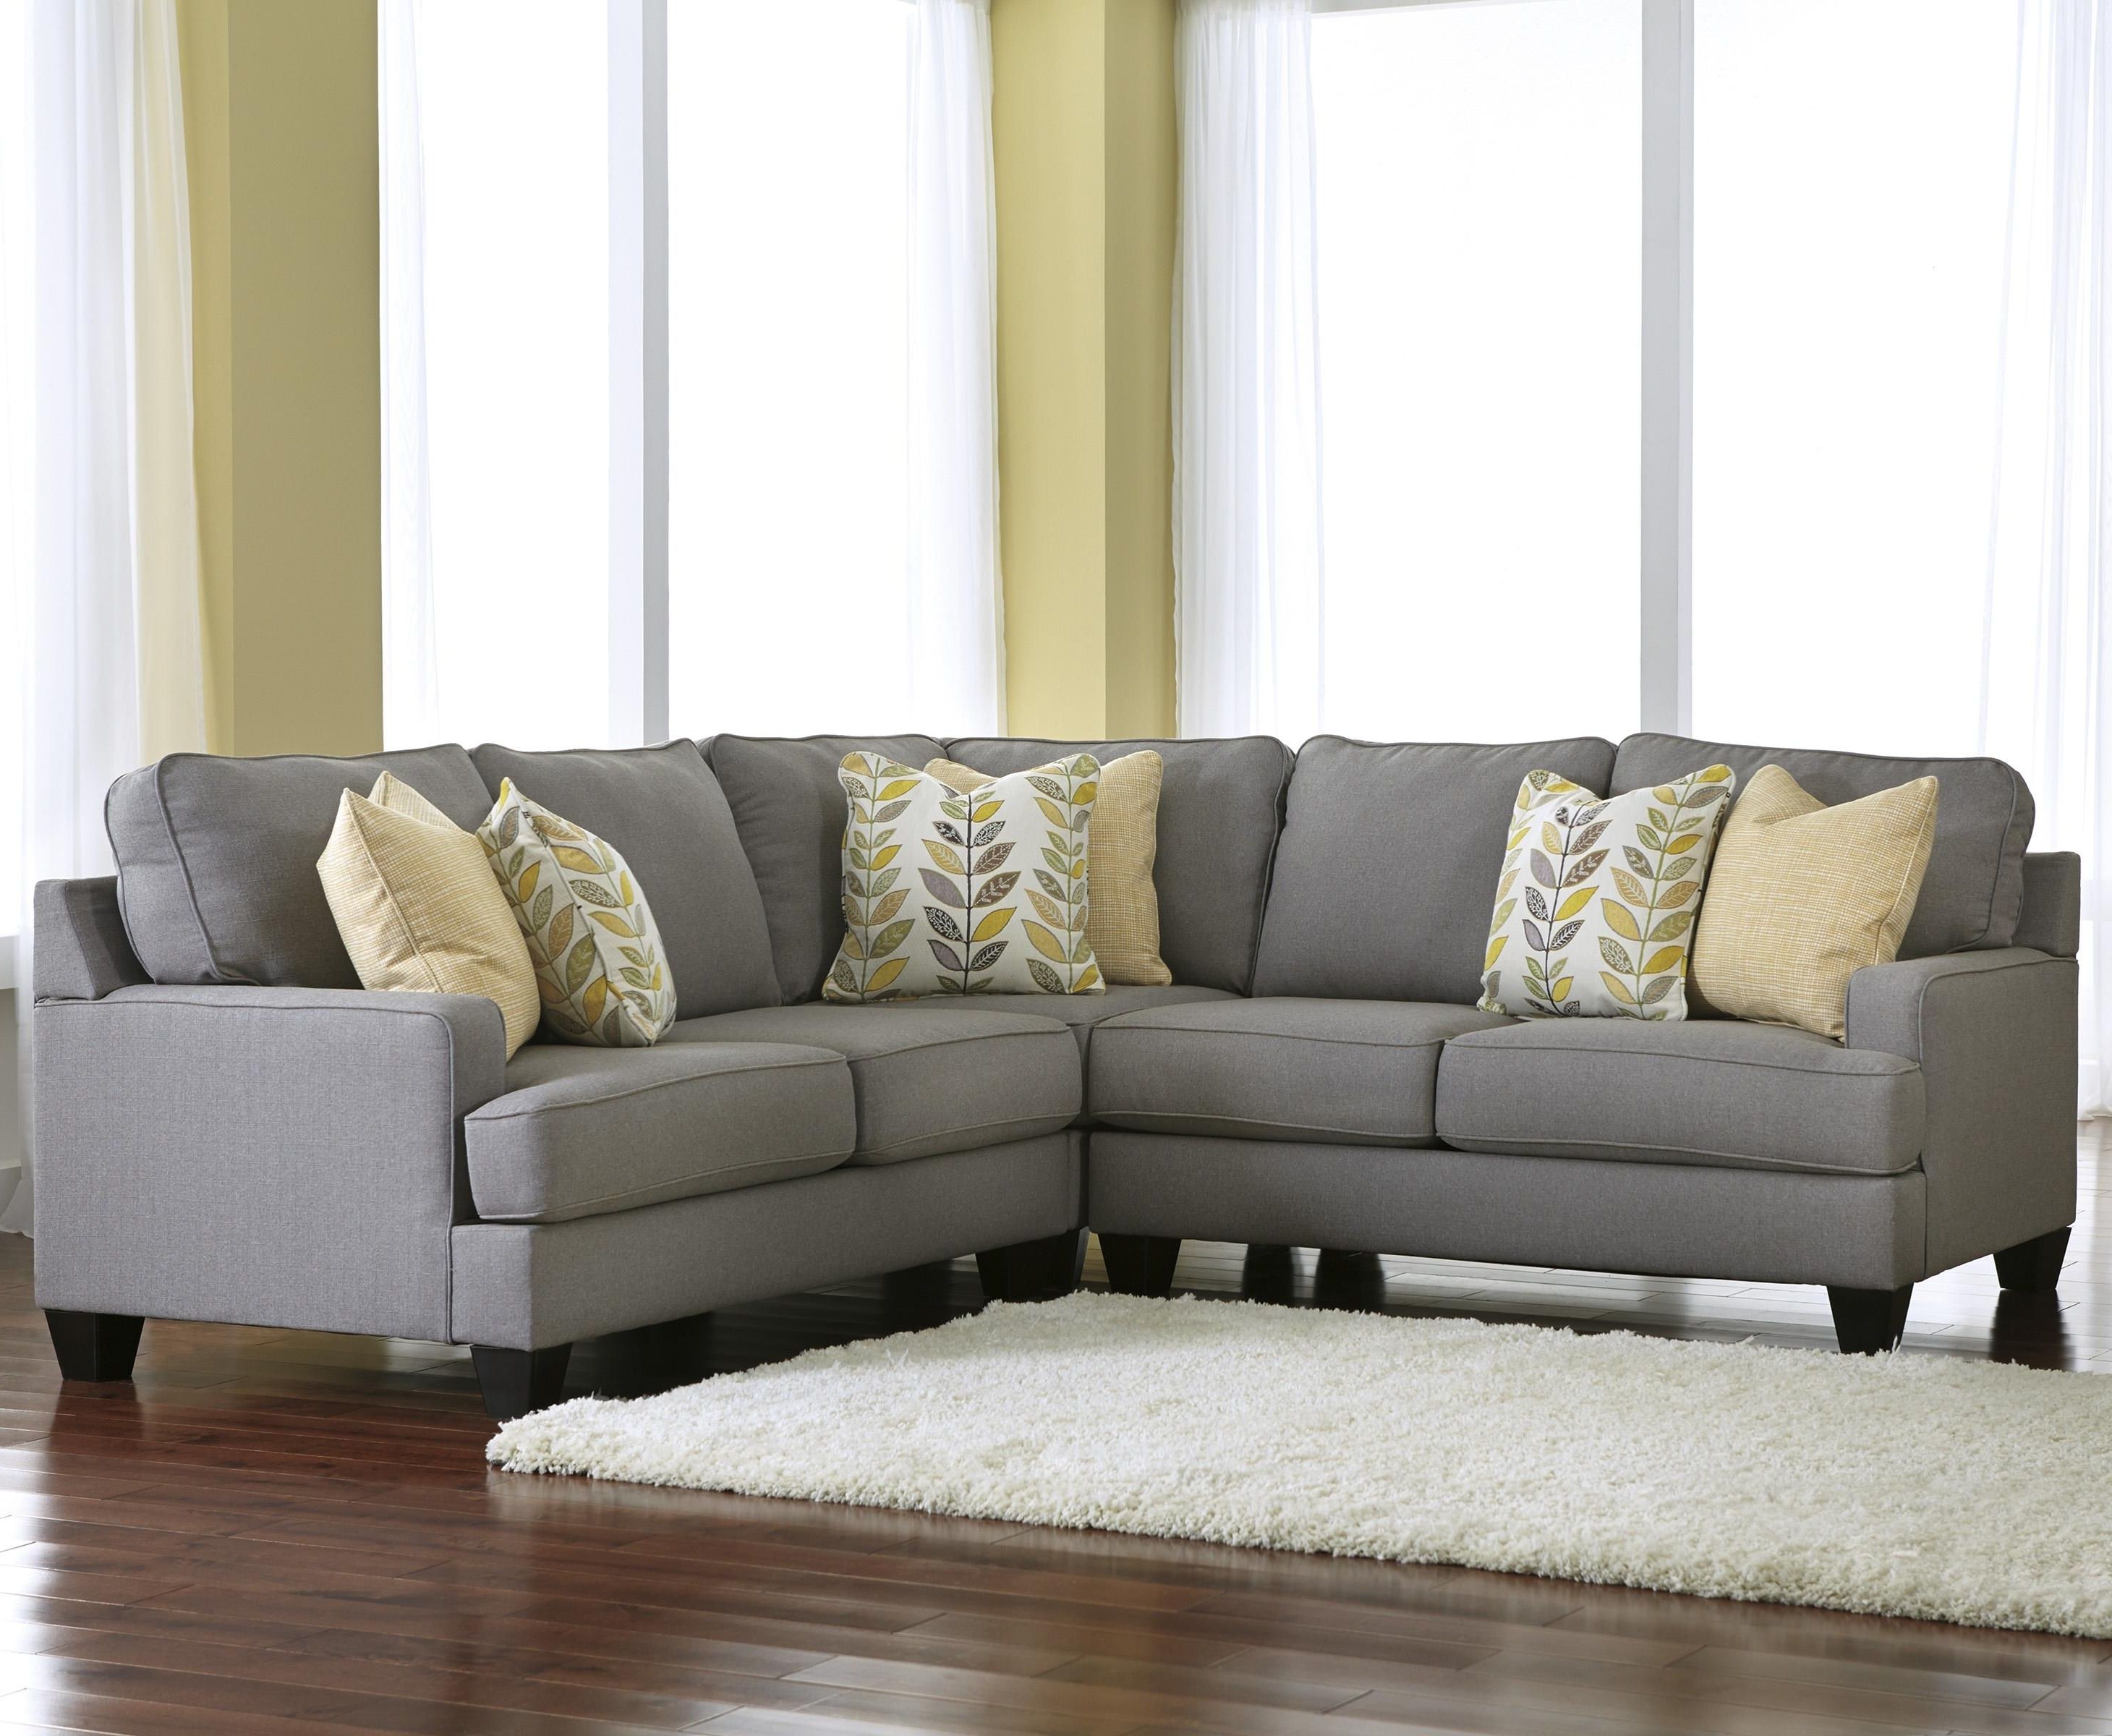 Newest Greenville Sc Sectional Sofas Intended For Signature Designashley Chamberly – Alloy Modern 3 Piece Corner (View 11 of 20)